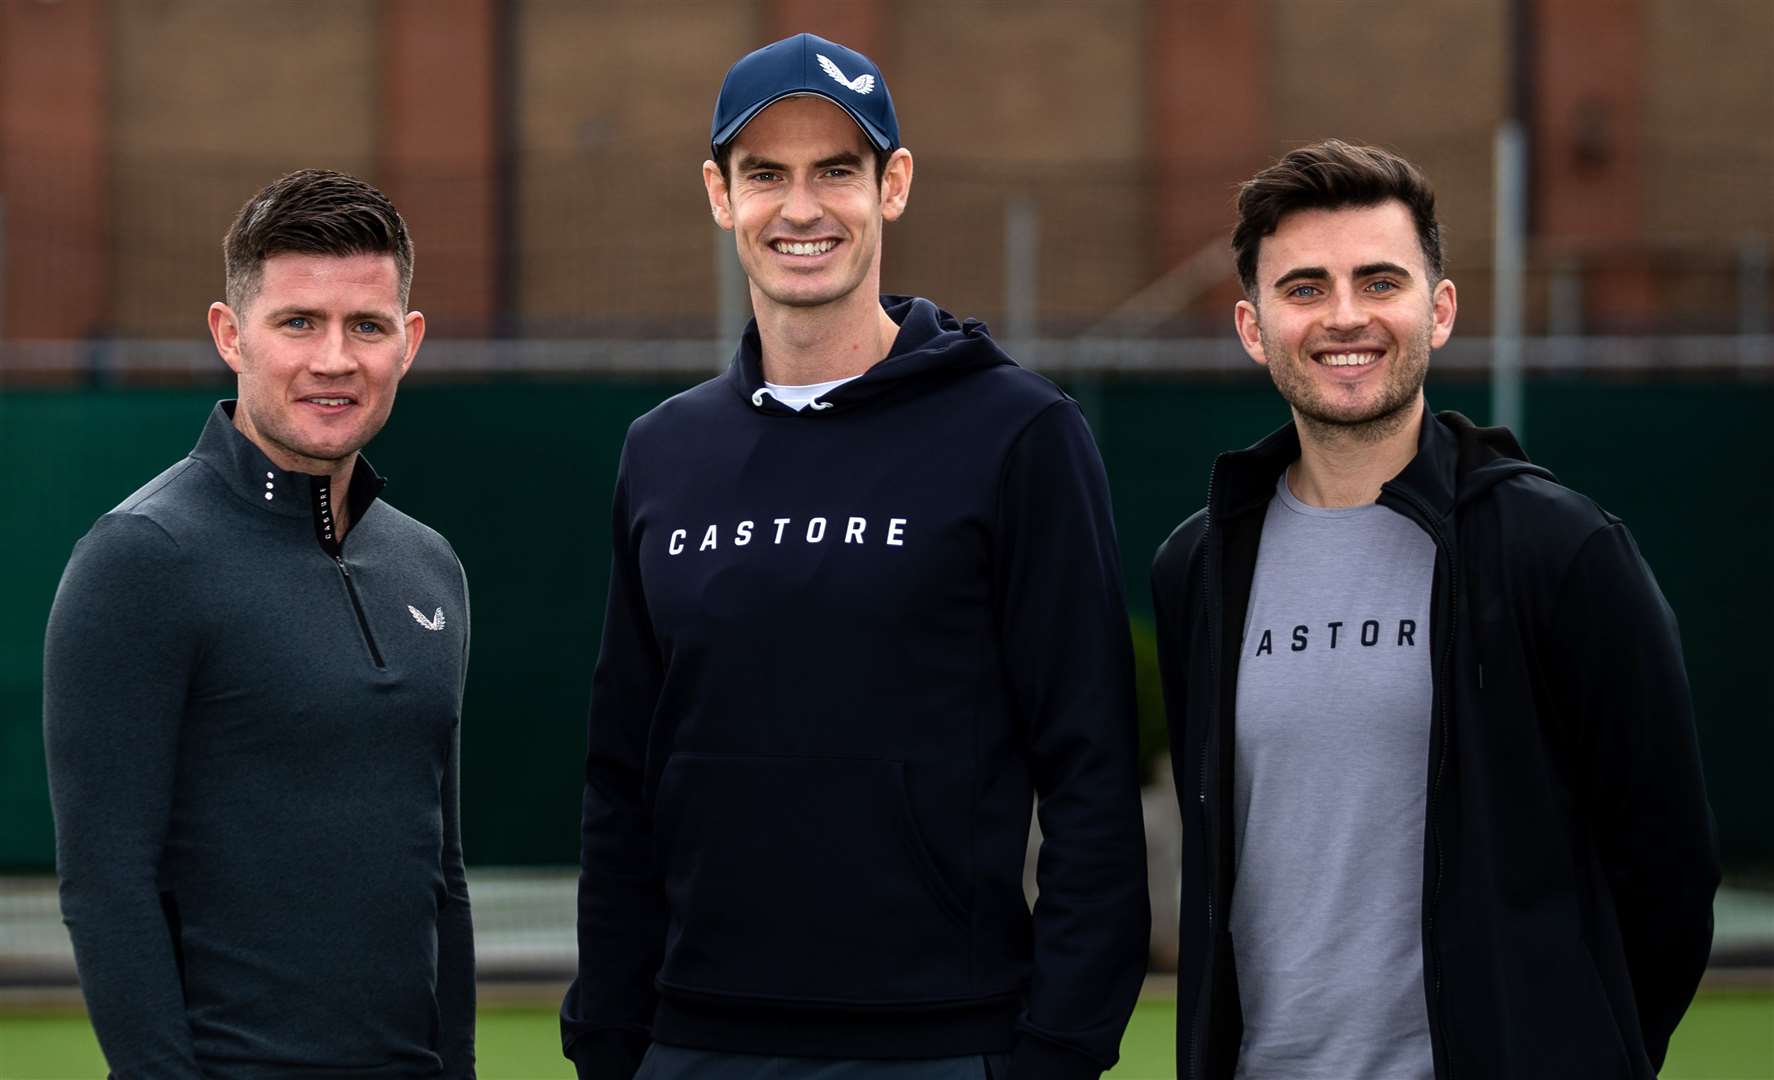 Sir Andy Murray was an early investor in Tom, left, and Phil Beahon’s sportswear brand Castore (Steven Paston/PA)